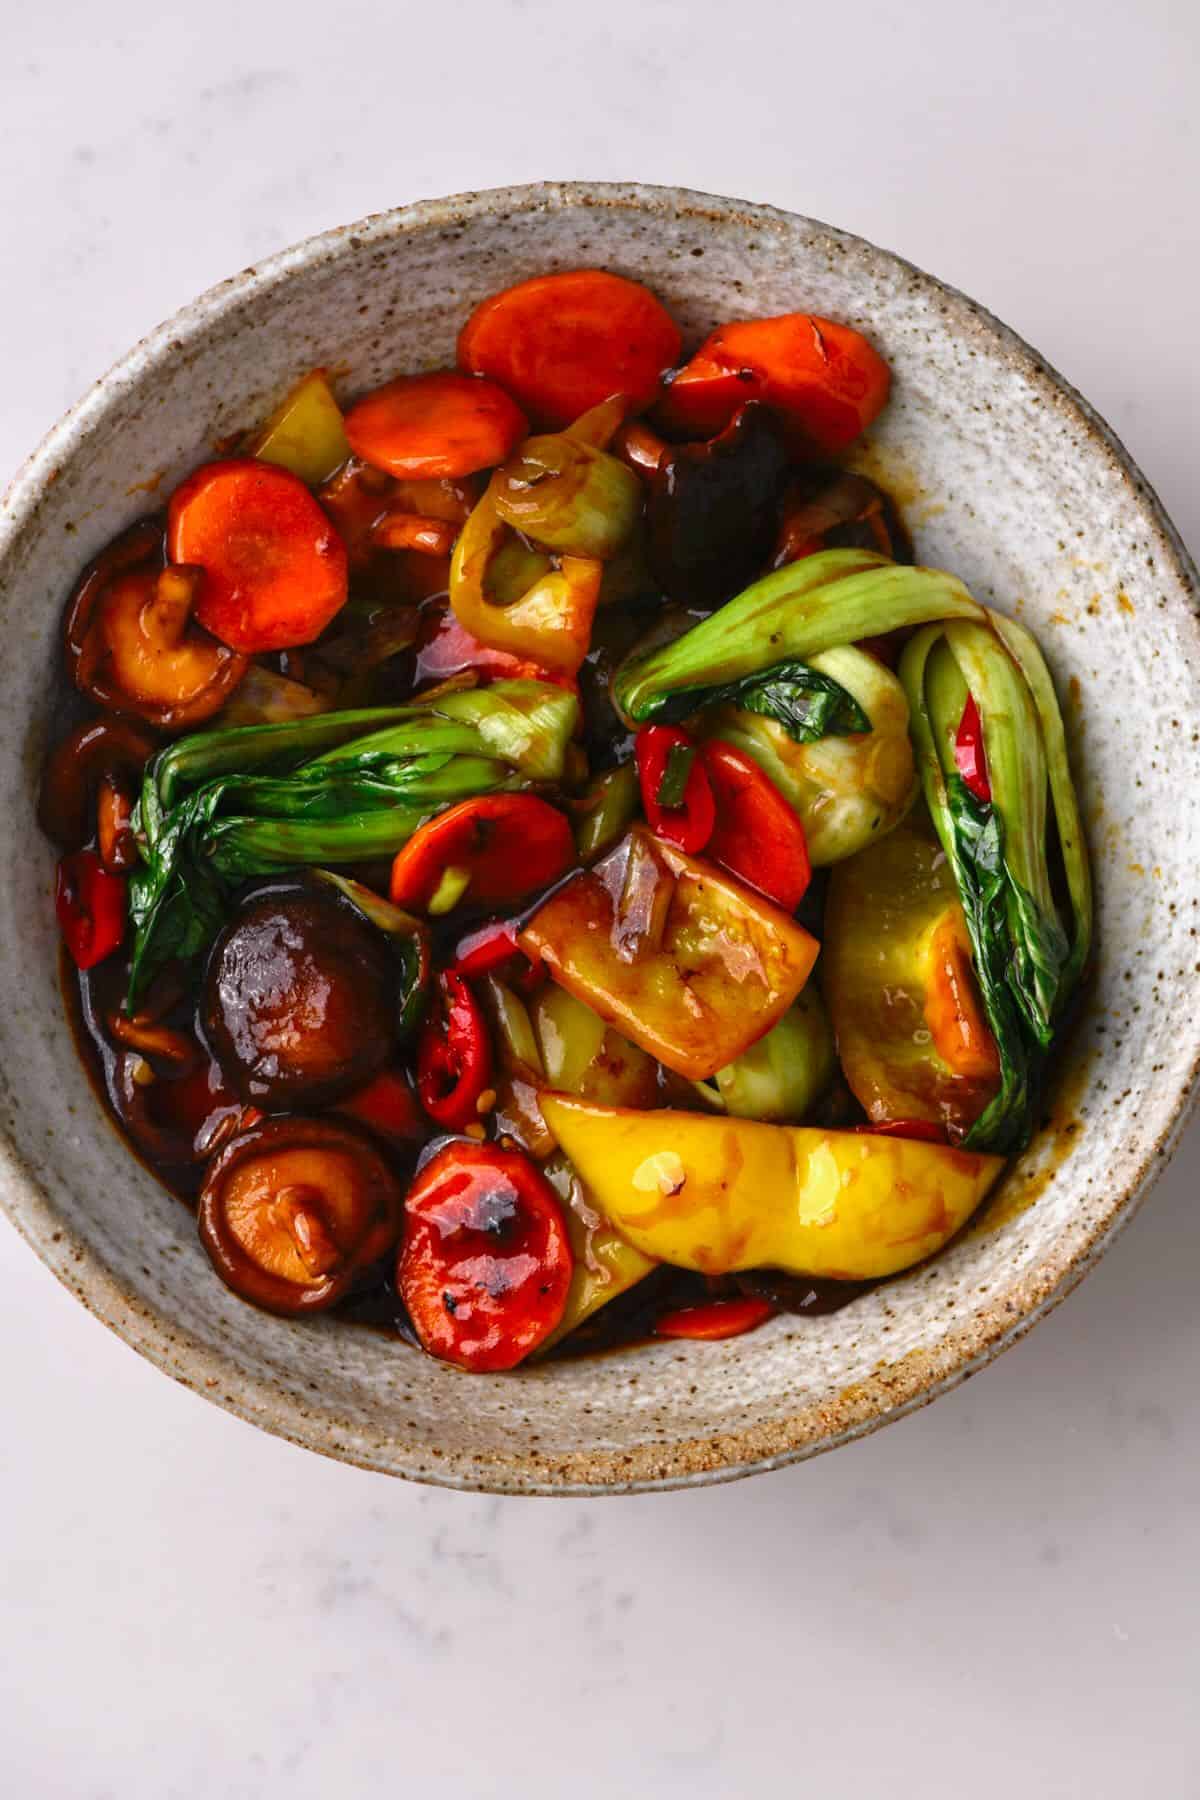 A bowl with vegetable stir fry